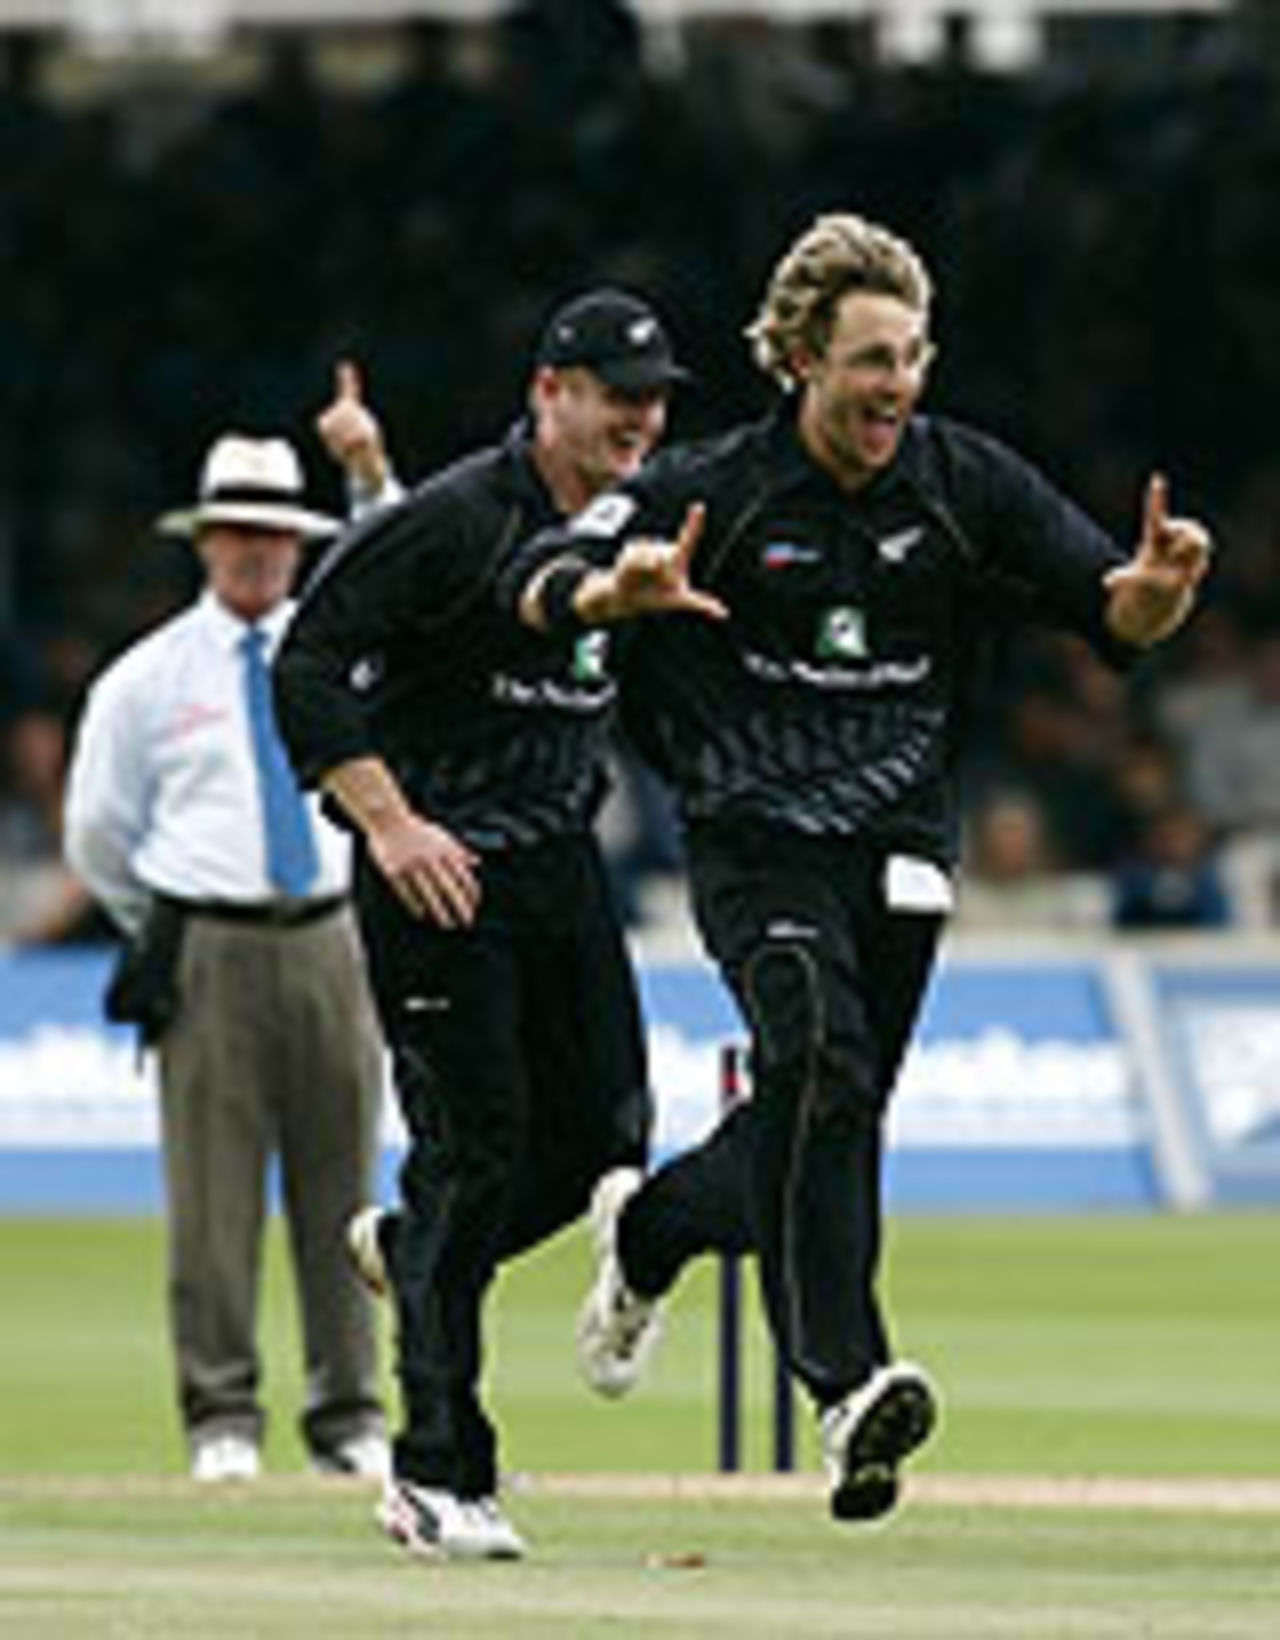 Daniel Vettori celebrates the run-out of Devon Smith, New Zealand v West Indies, Lord's, July 10, 2004